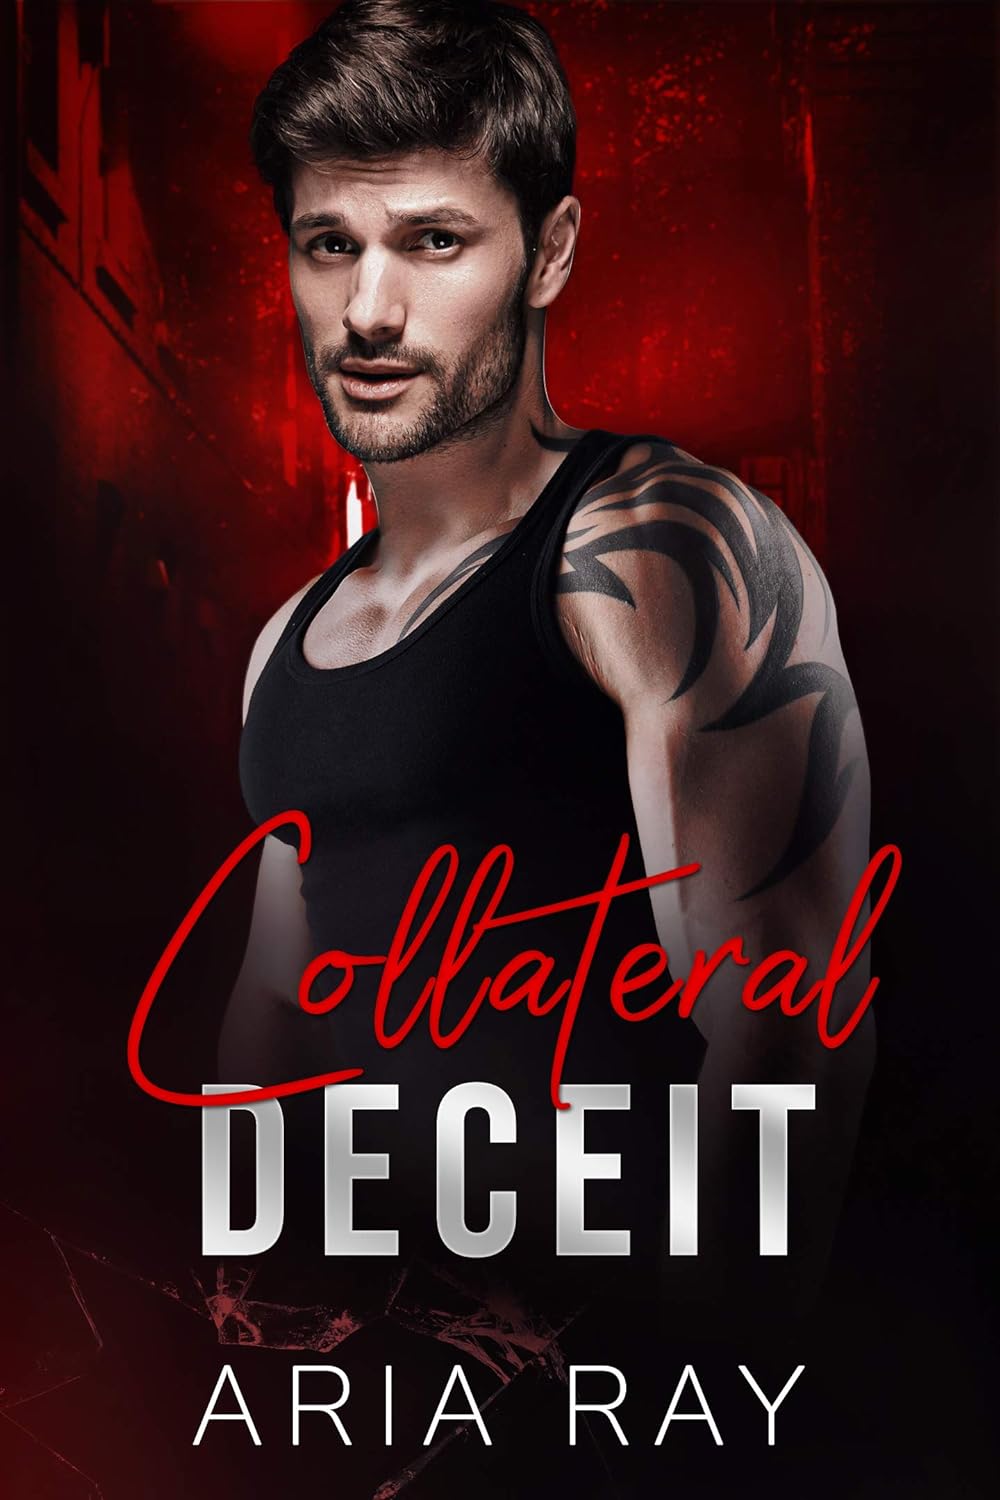 Collateral Deceit_ A Russian Ma - Aria Ray